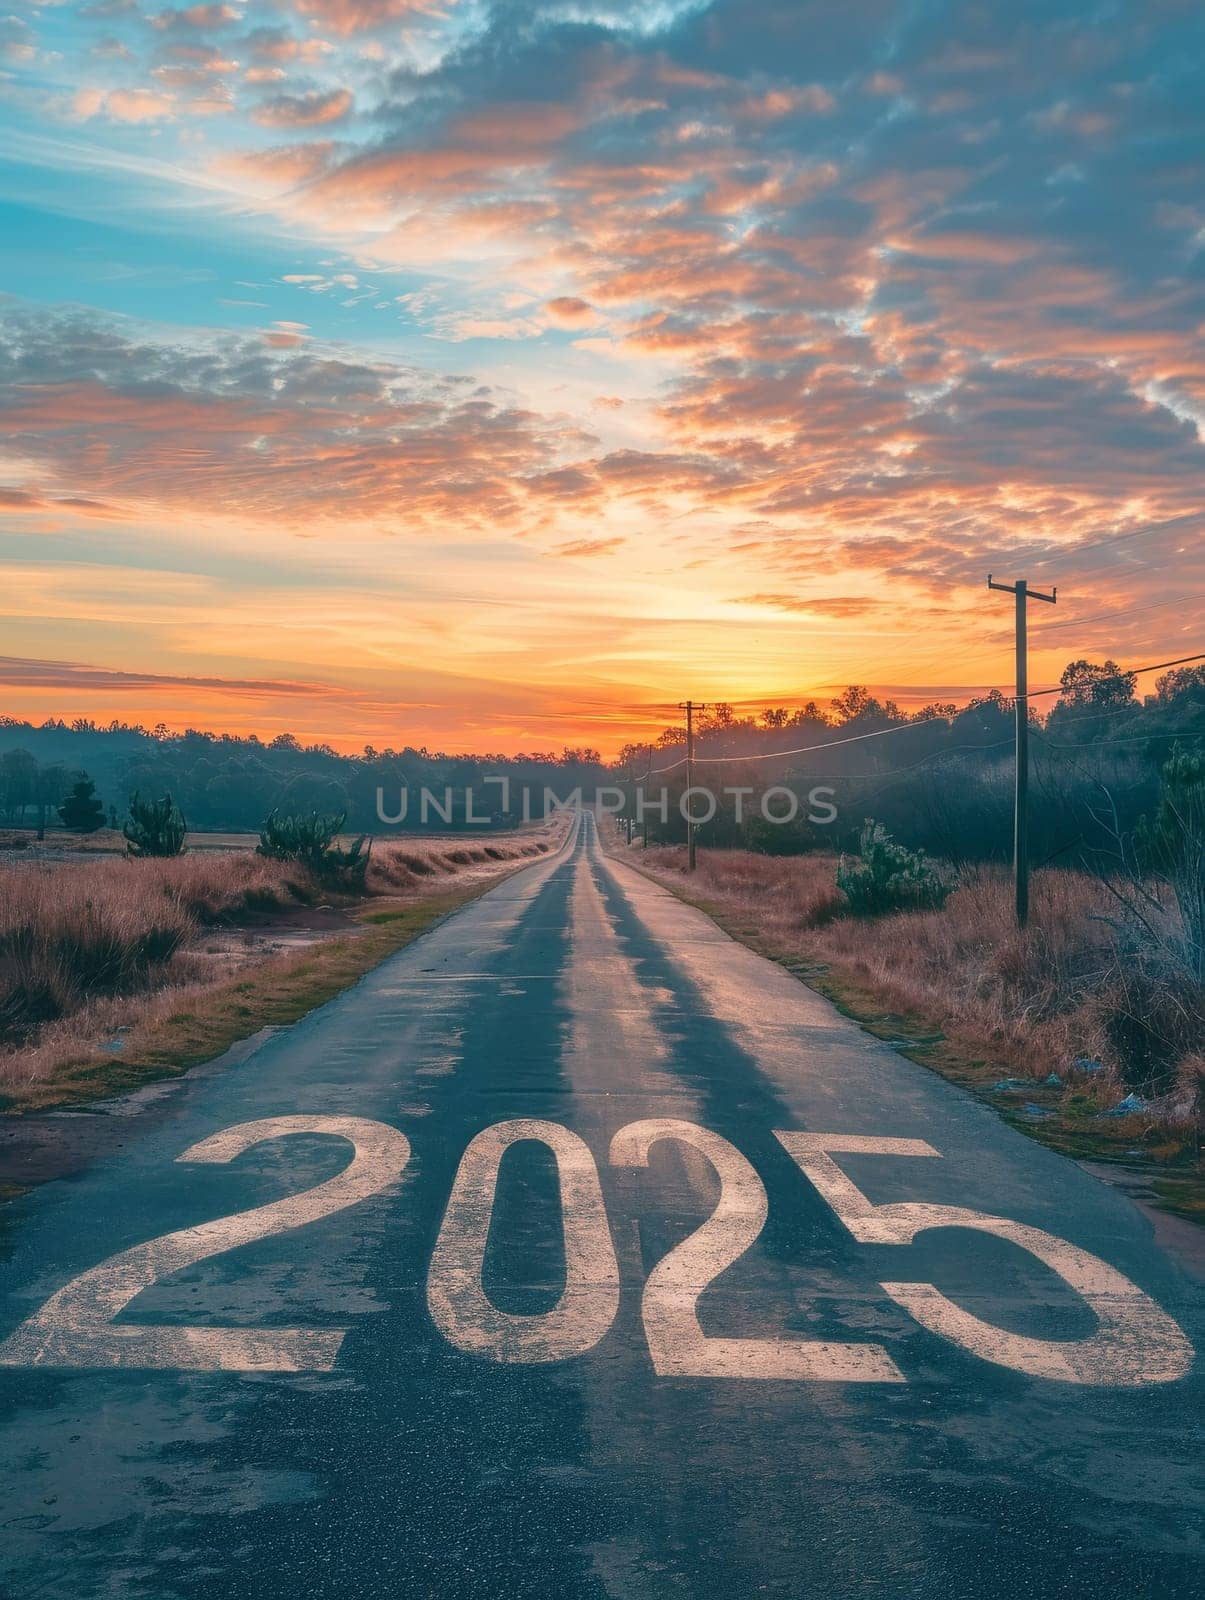 A crisp sunrise road boldly displays '2025', as if guiding travelers toward the promise of the coming year. The dawn sky flares with colors of hope and new possibilities